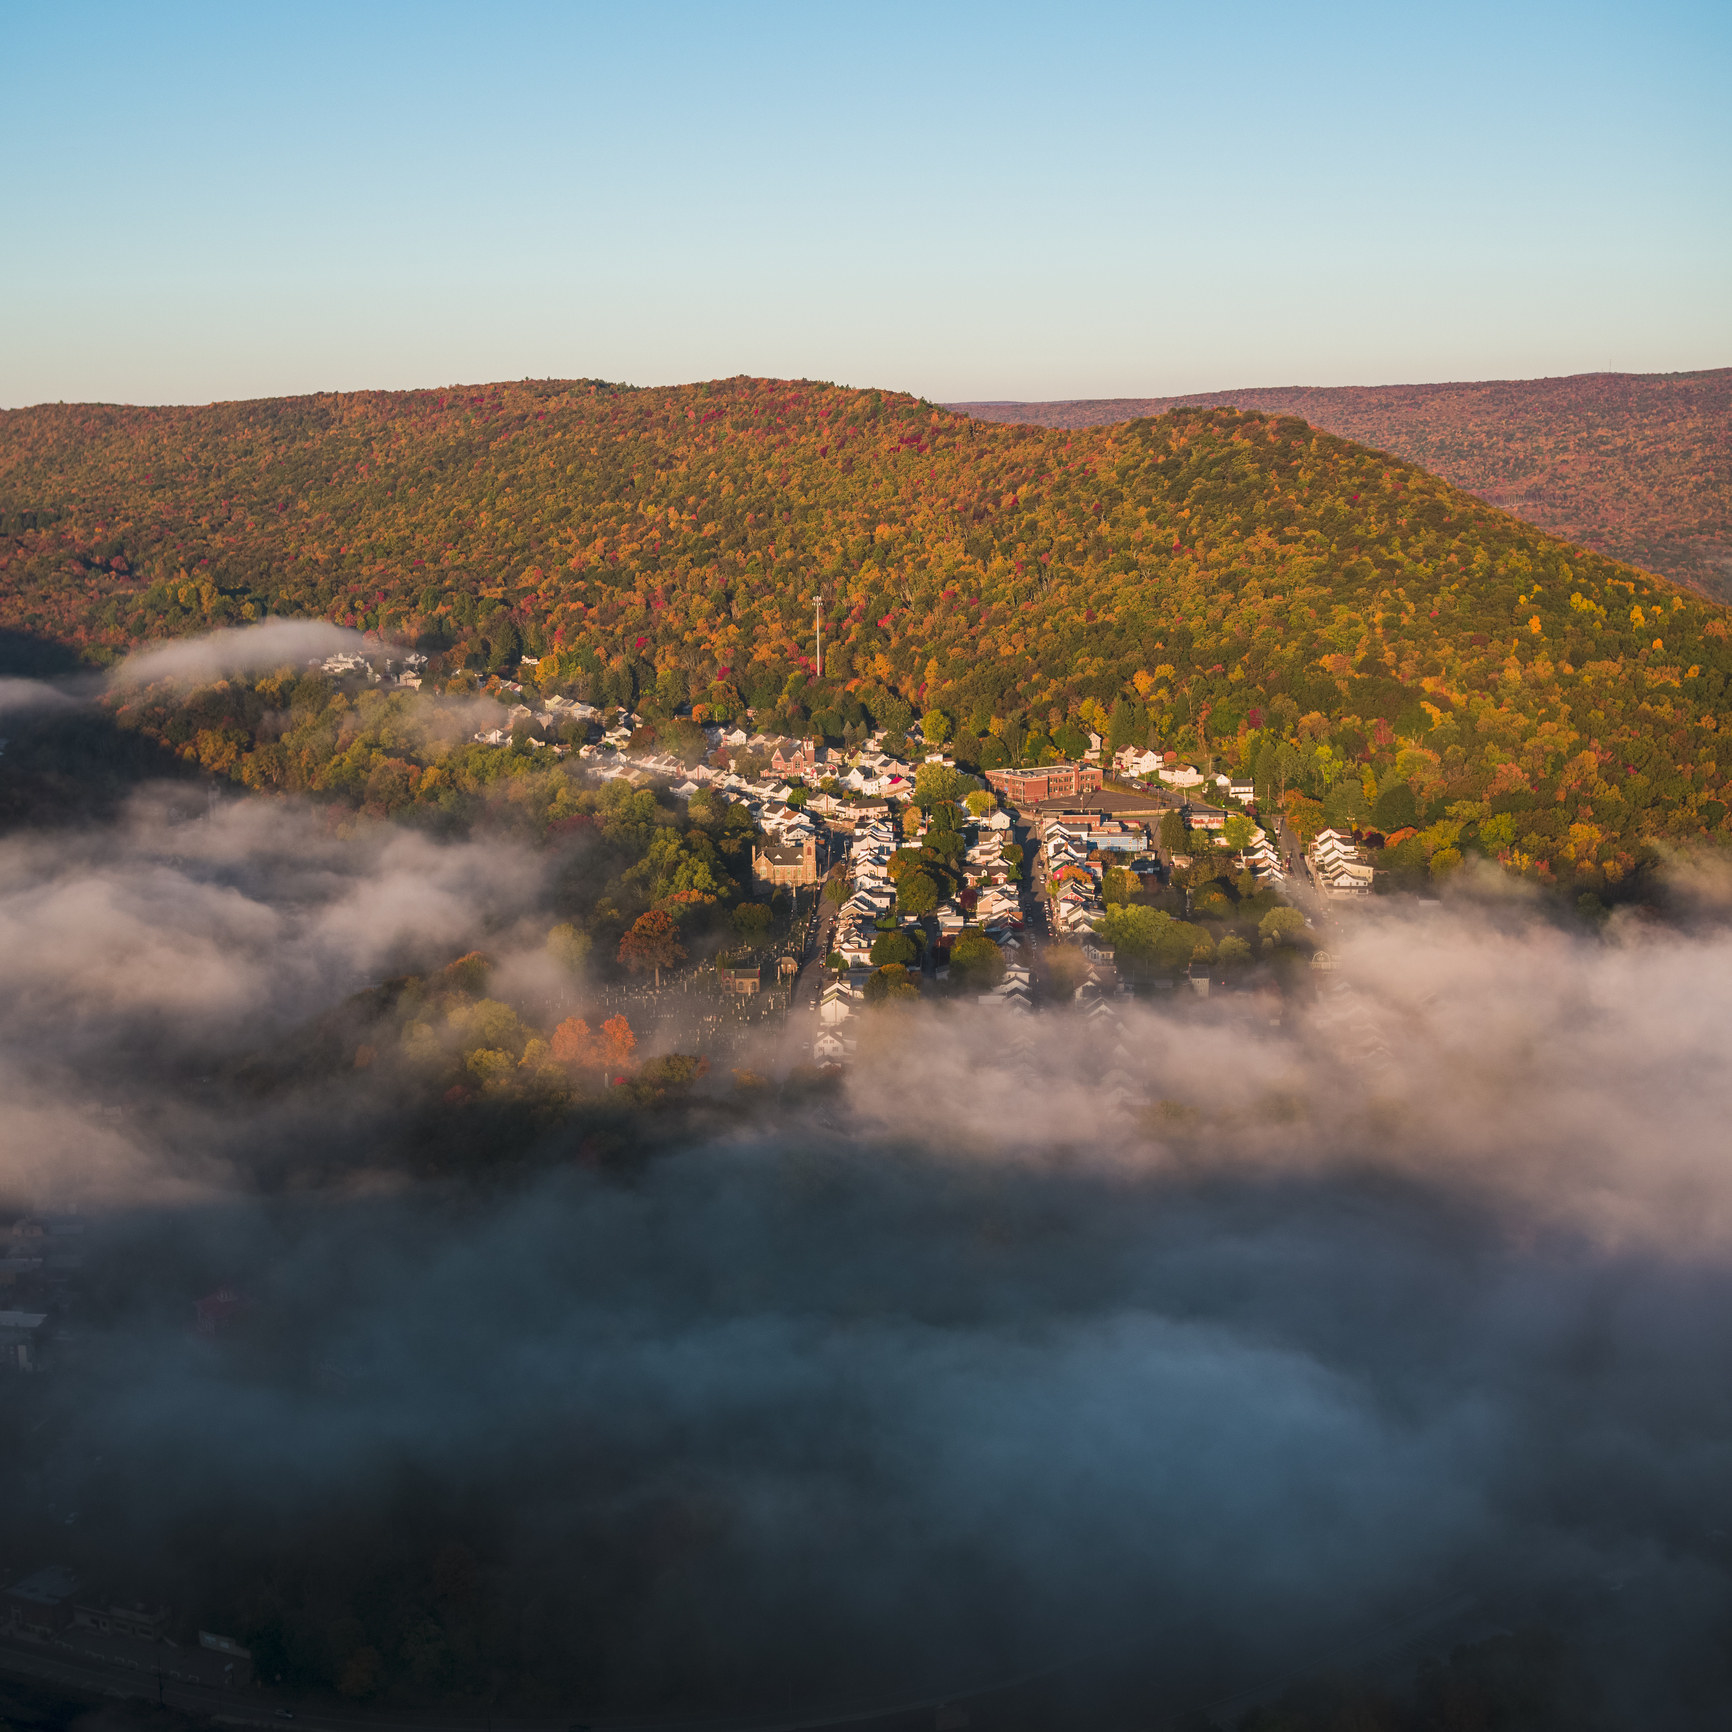 Low clouds over the historical town Jim Thorpe.